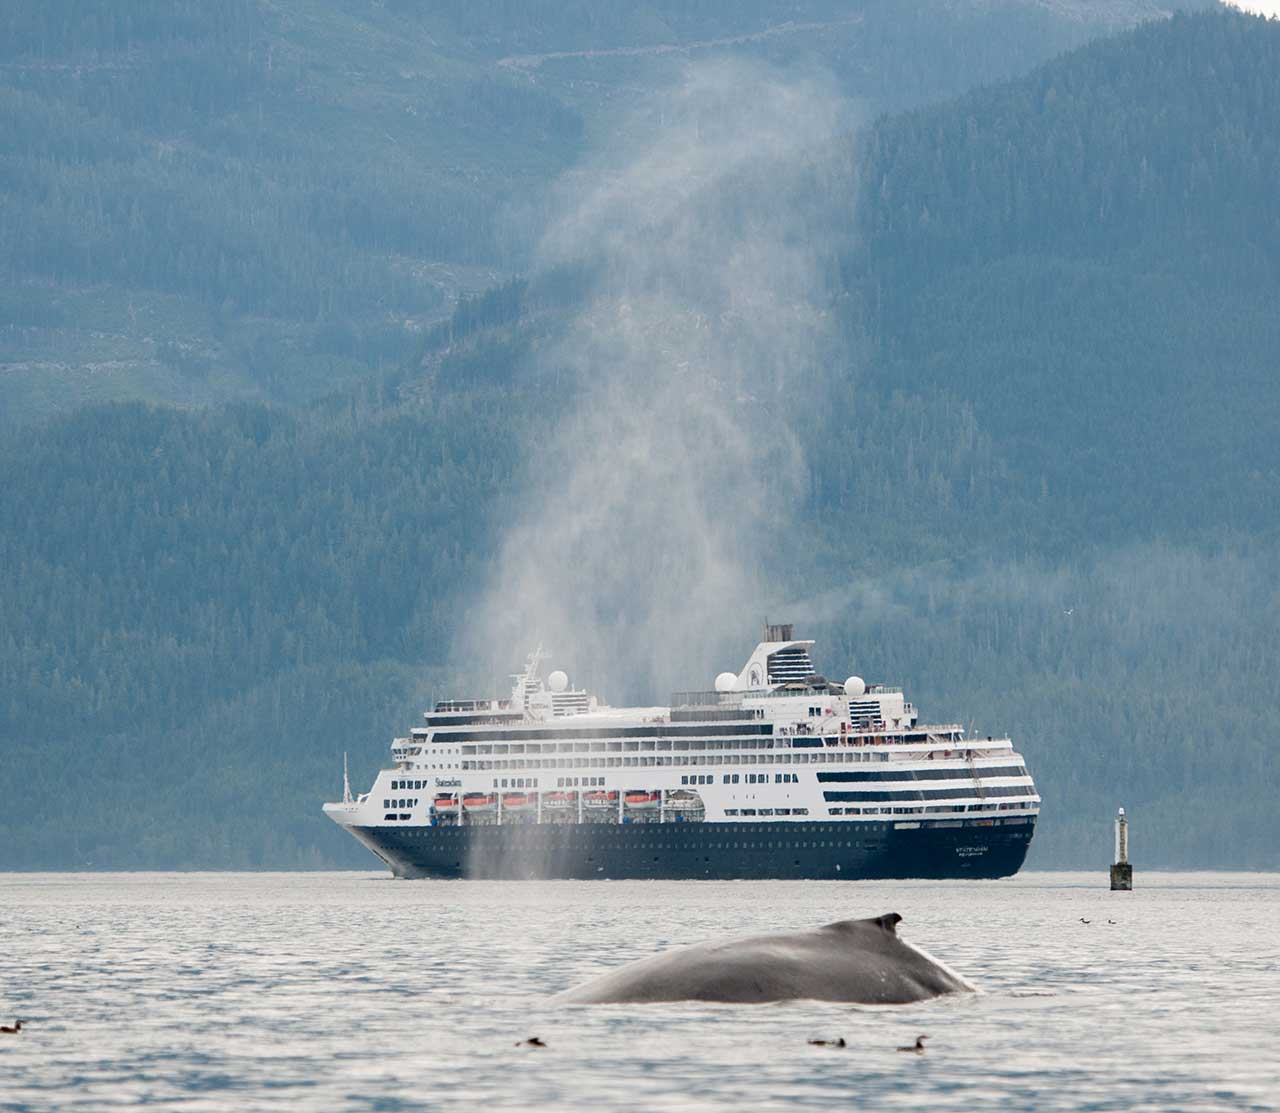 mers marine education research society whale guardian with cruise ship in background s